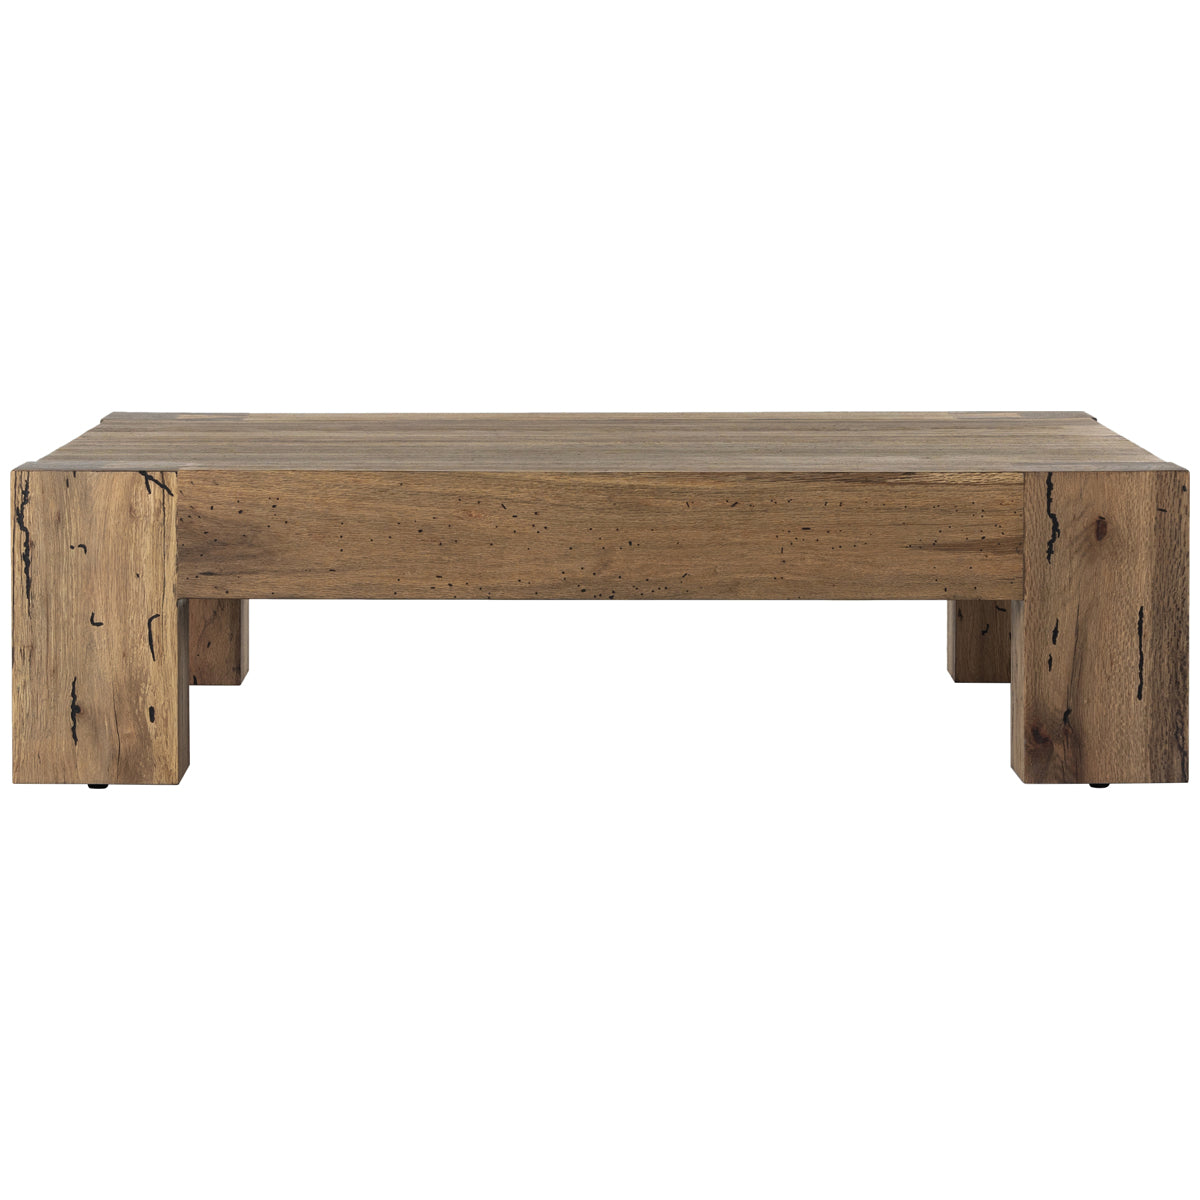 Four Hands Wesson Abaso Coffee Table - Rustic Wormwood Oak